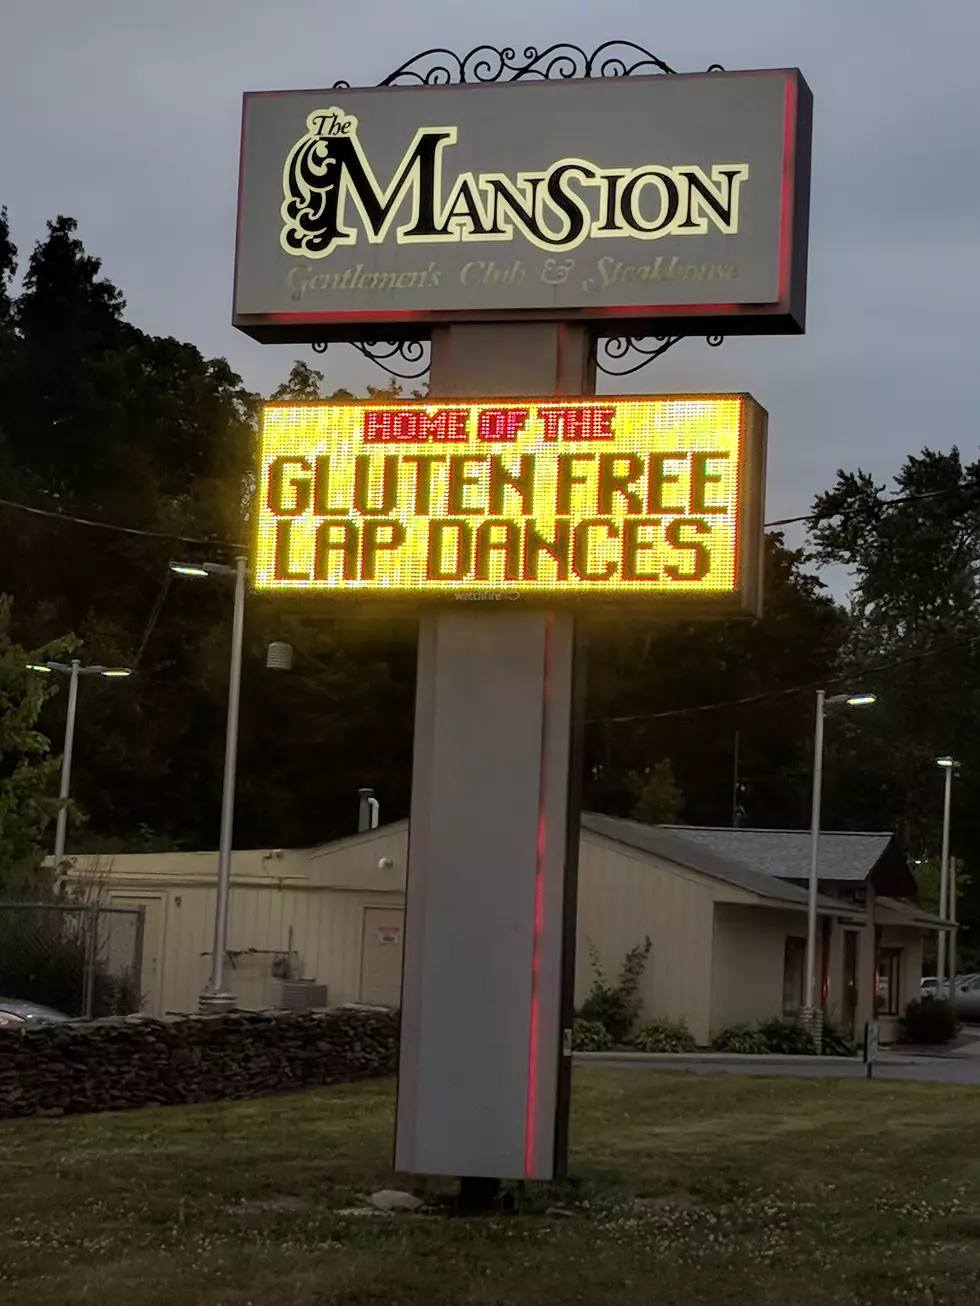 Hudson Valley Business Goes Viral Thanks to Hilarious Sign